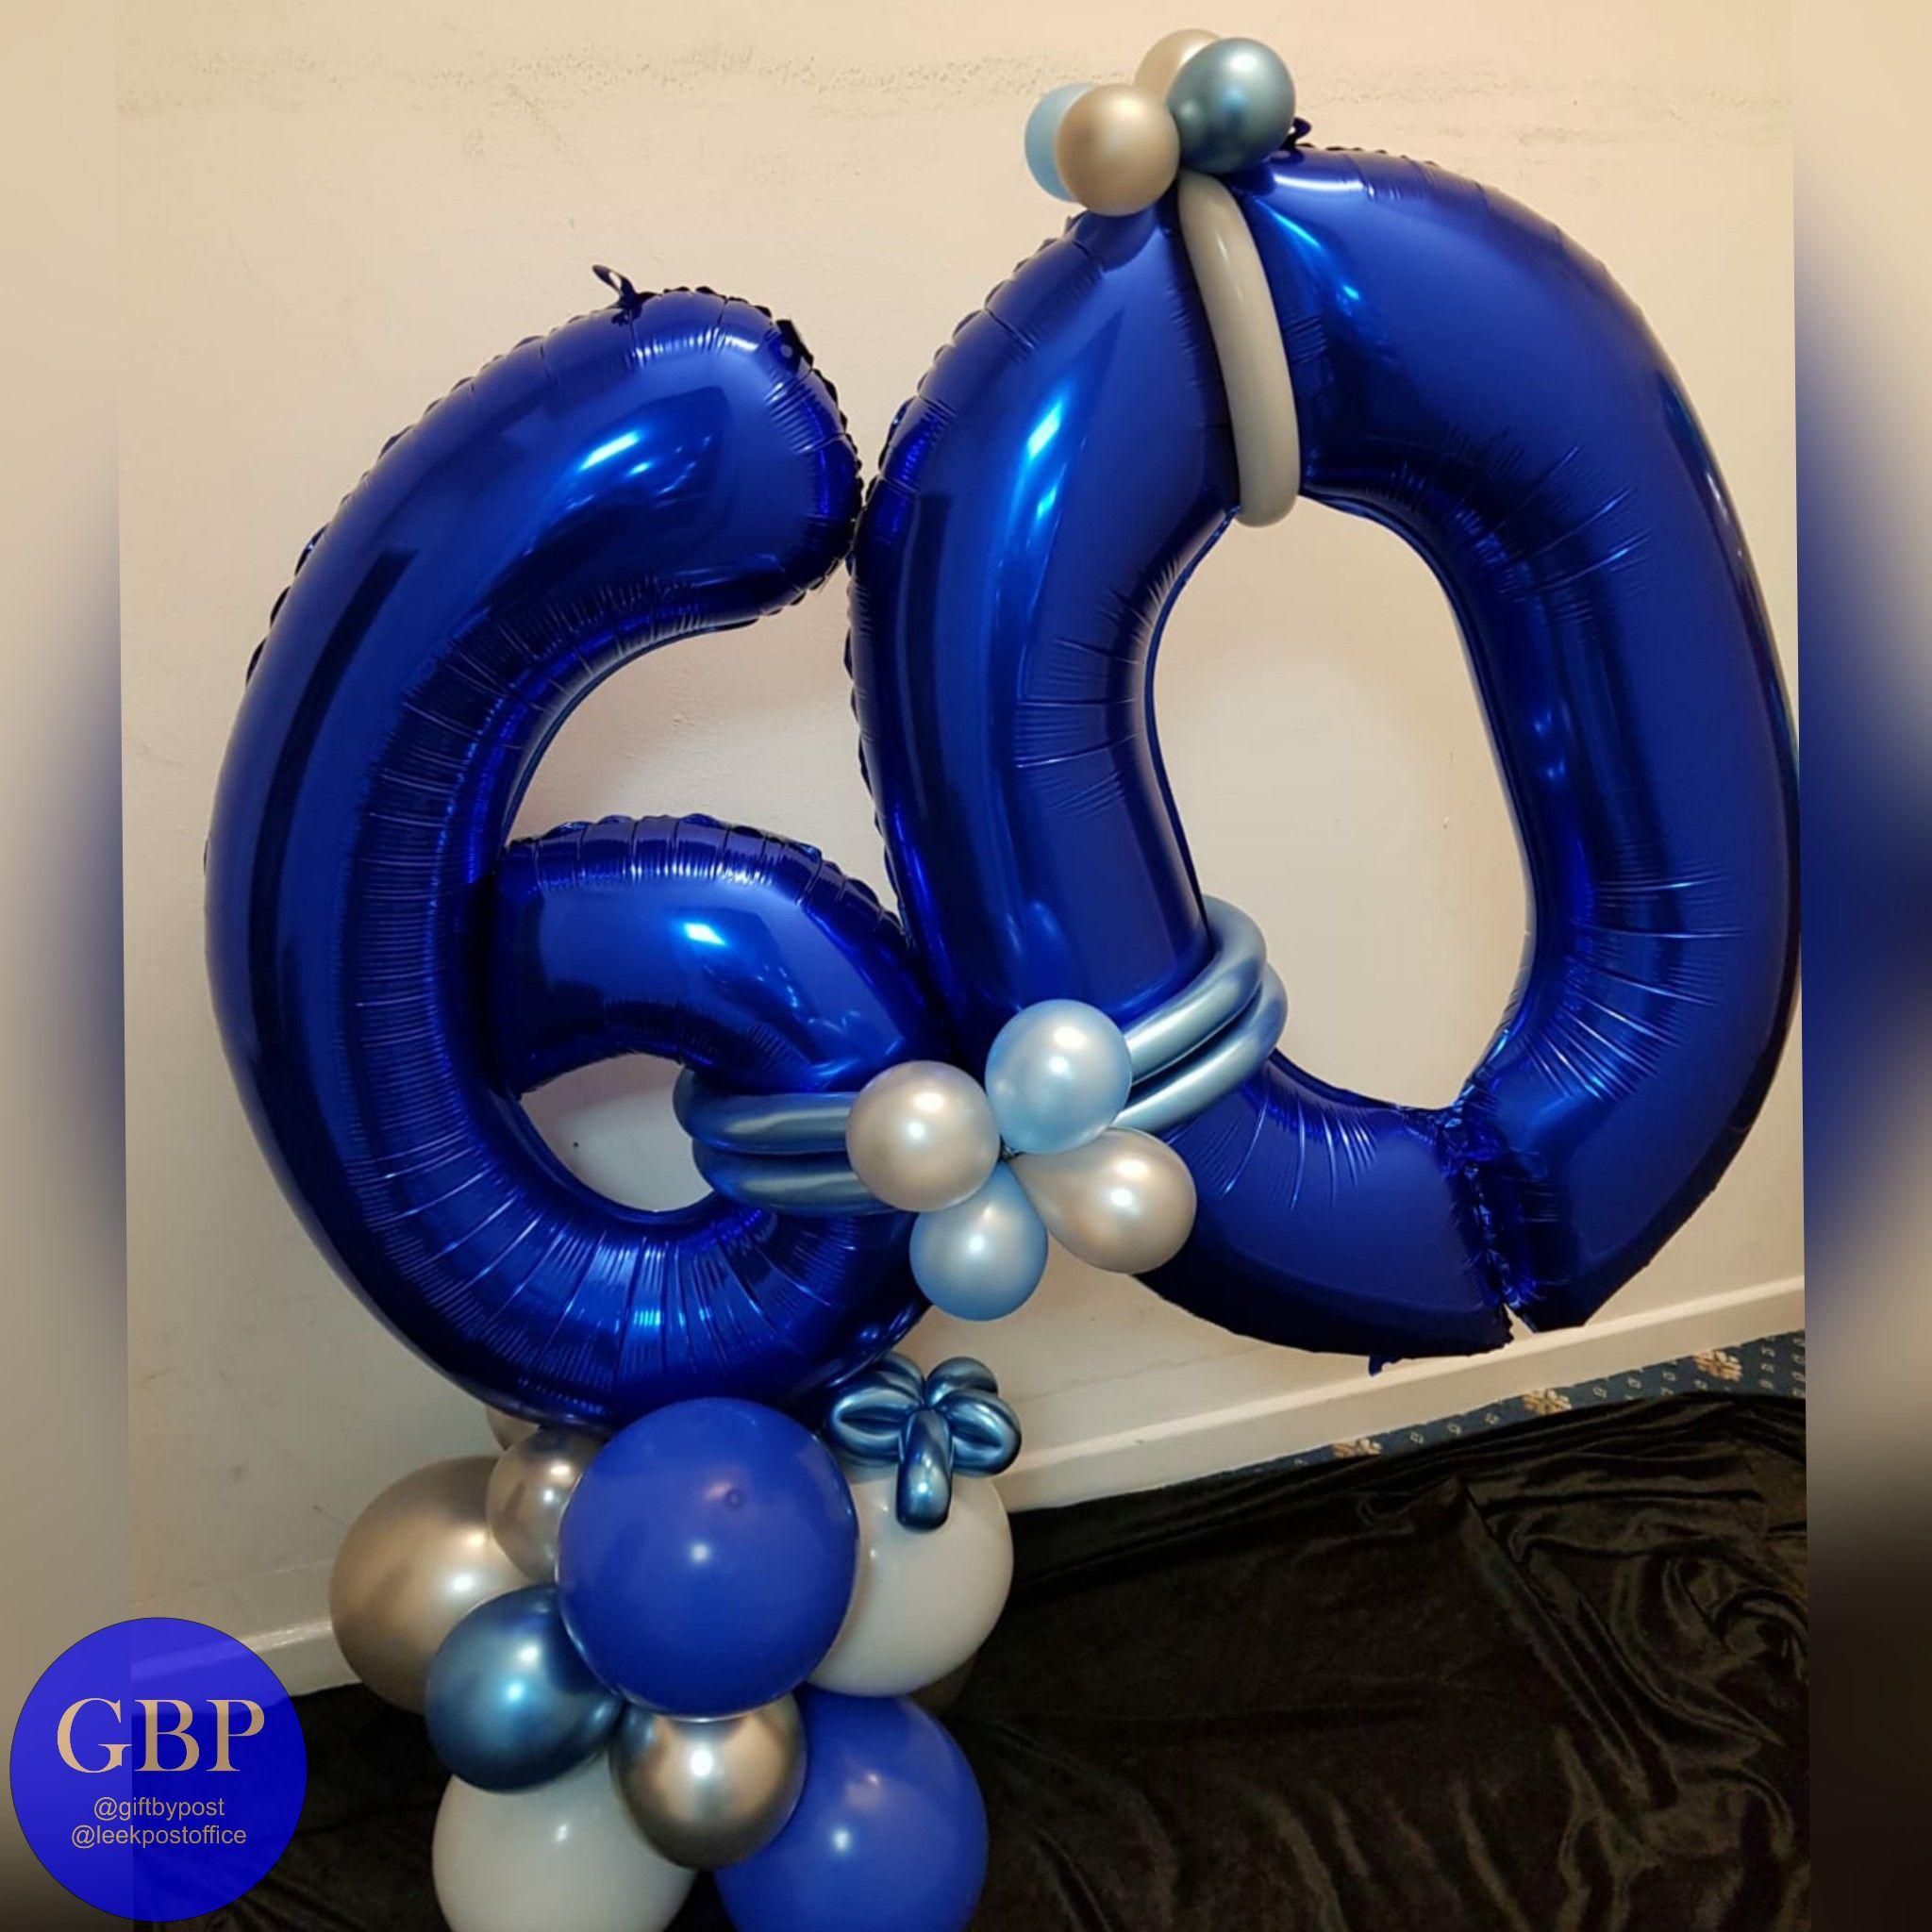 Large Numbers Balloon on a base, Age 60 Blue